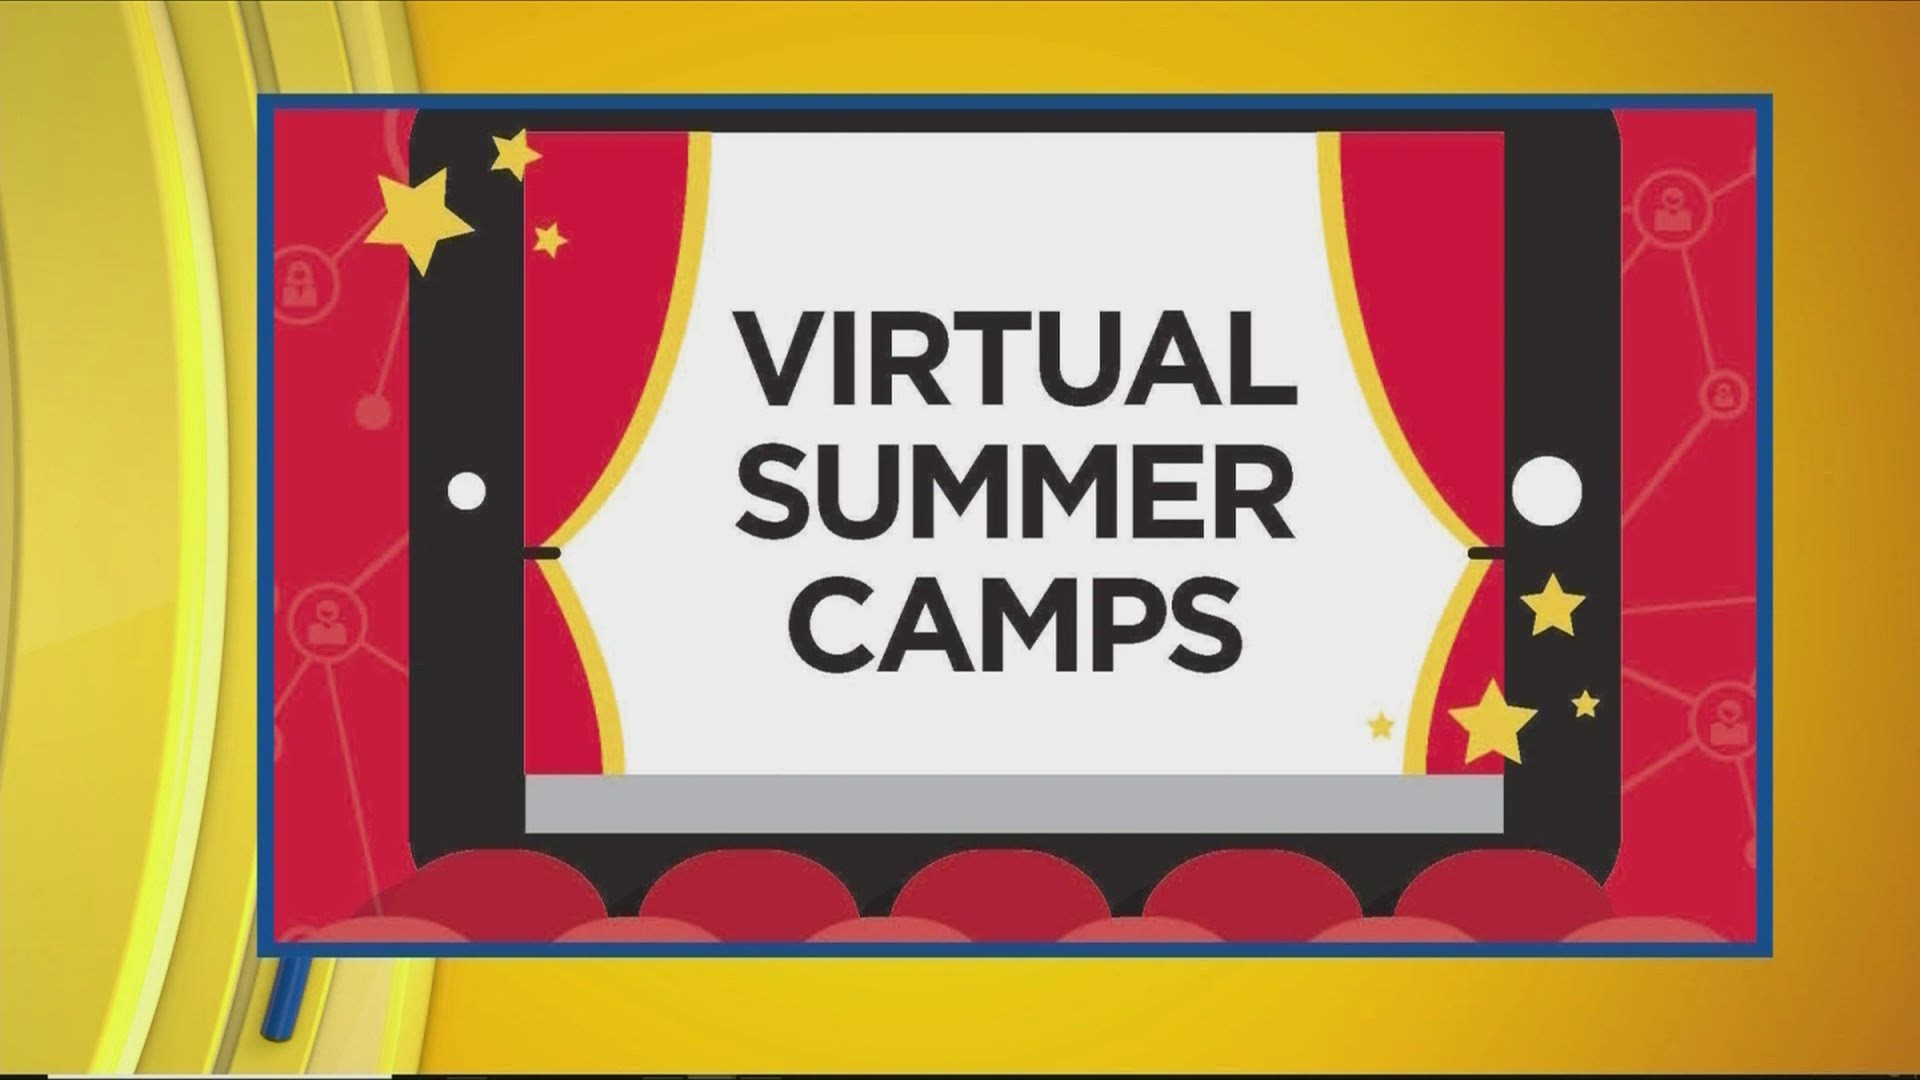 Lou and Jackie learn about the virtual Summer camps that Des Moines Performing Arts is offering